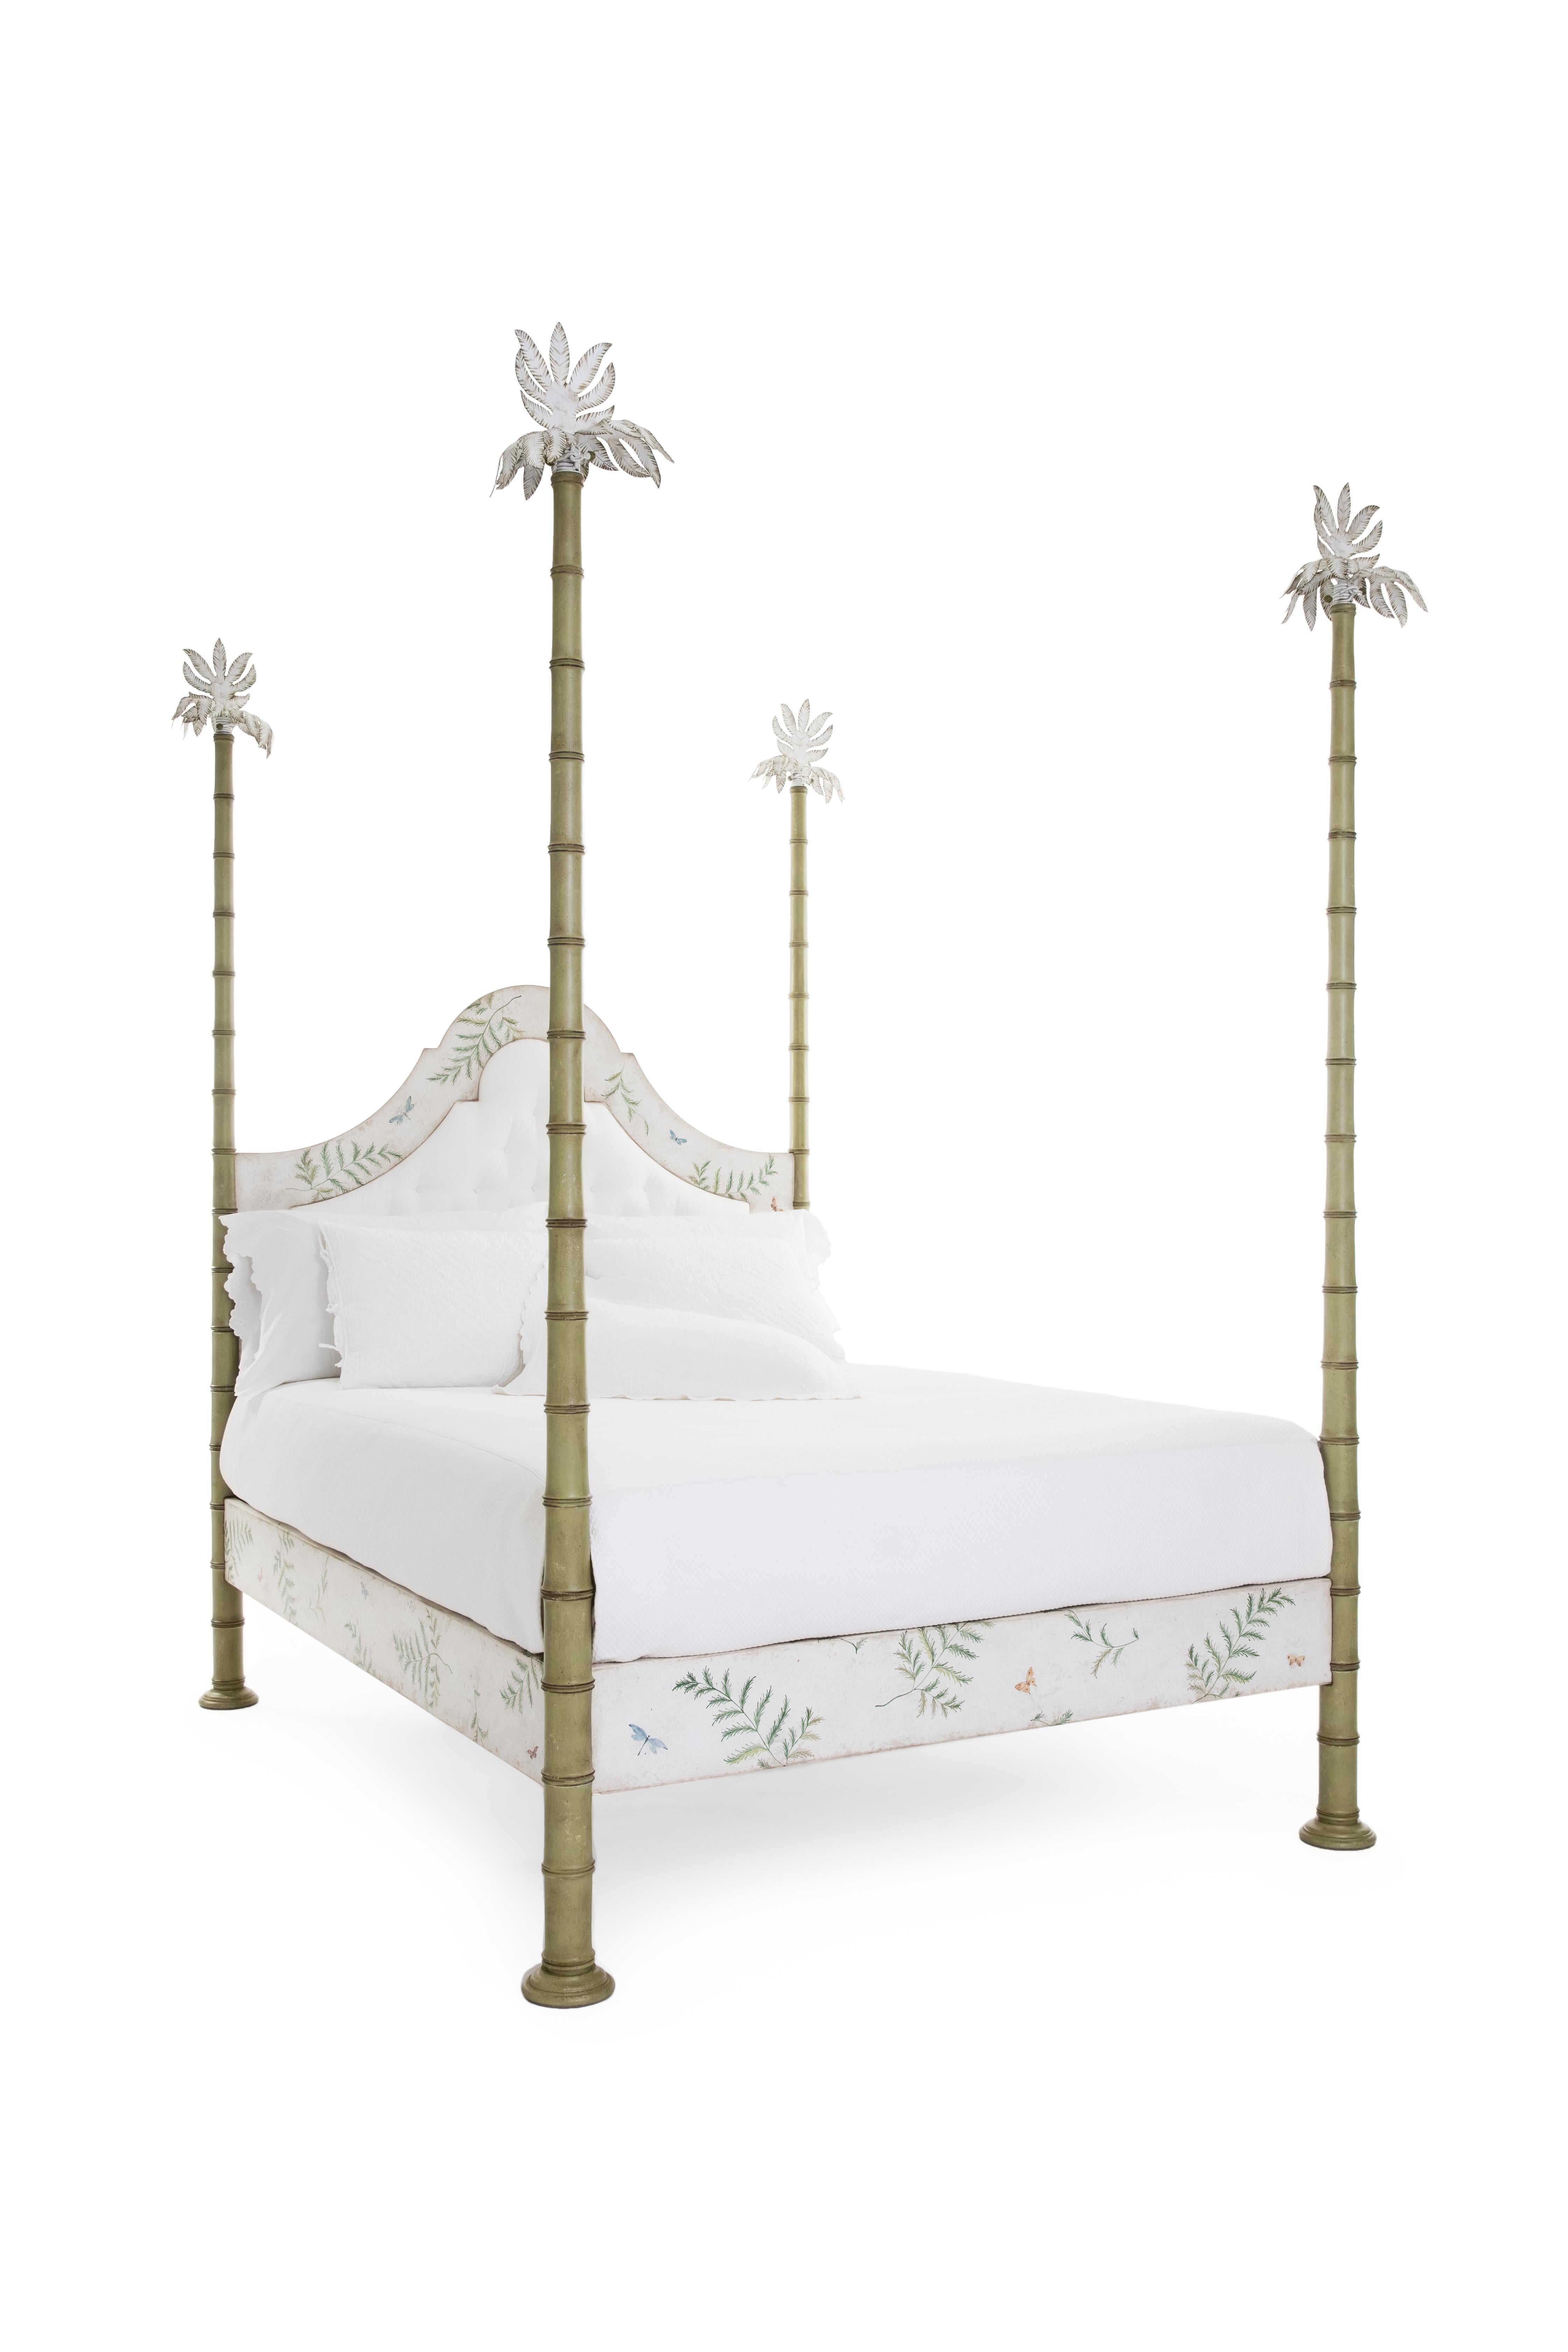 We are pleased to introduce you to our Bamboo Roma Bed with iron palm finials. 
This beautiful bed is finished with olive green bamboo that match the ferns decors on the frame. 
The decor is completed with colorful butterflies that fly upon the